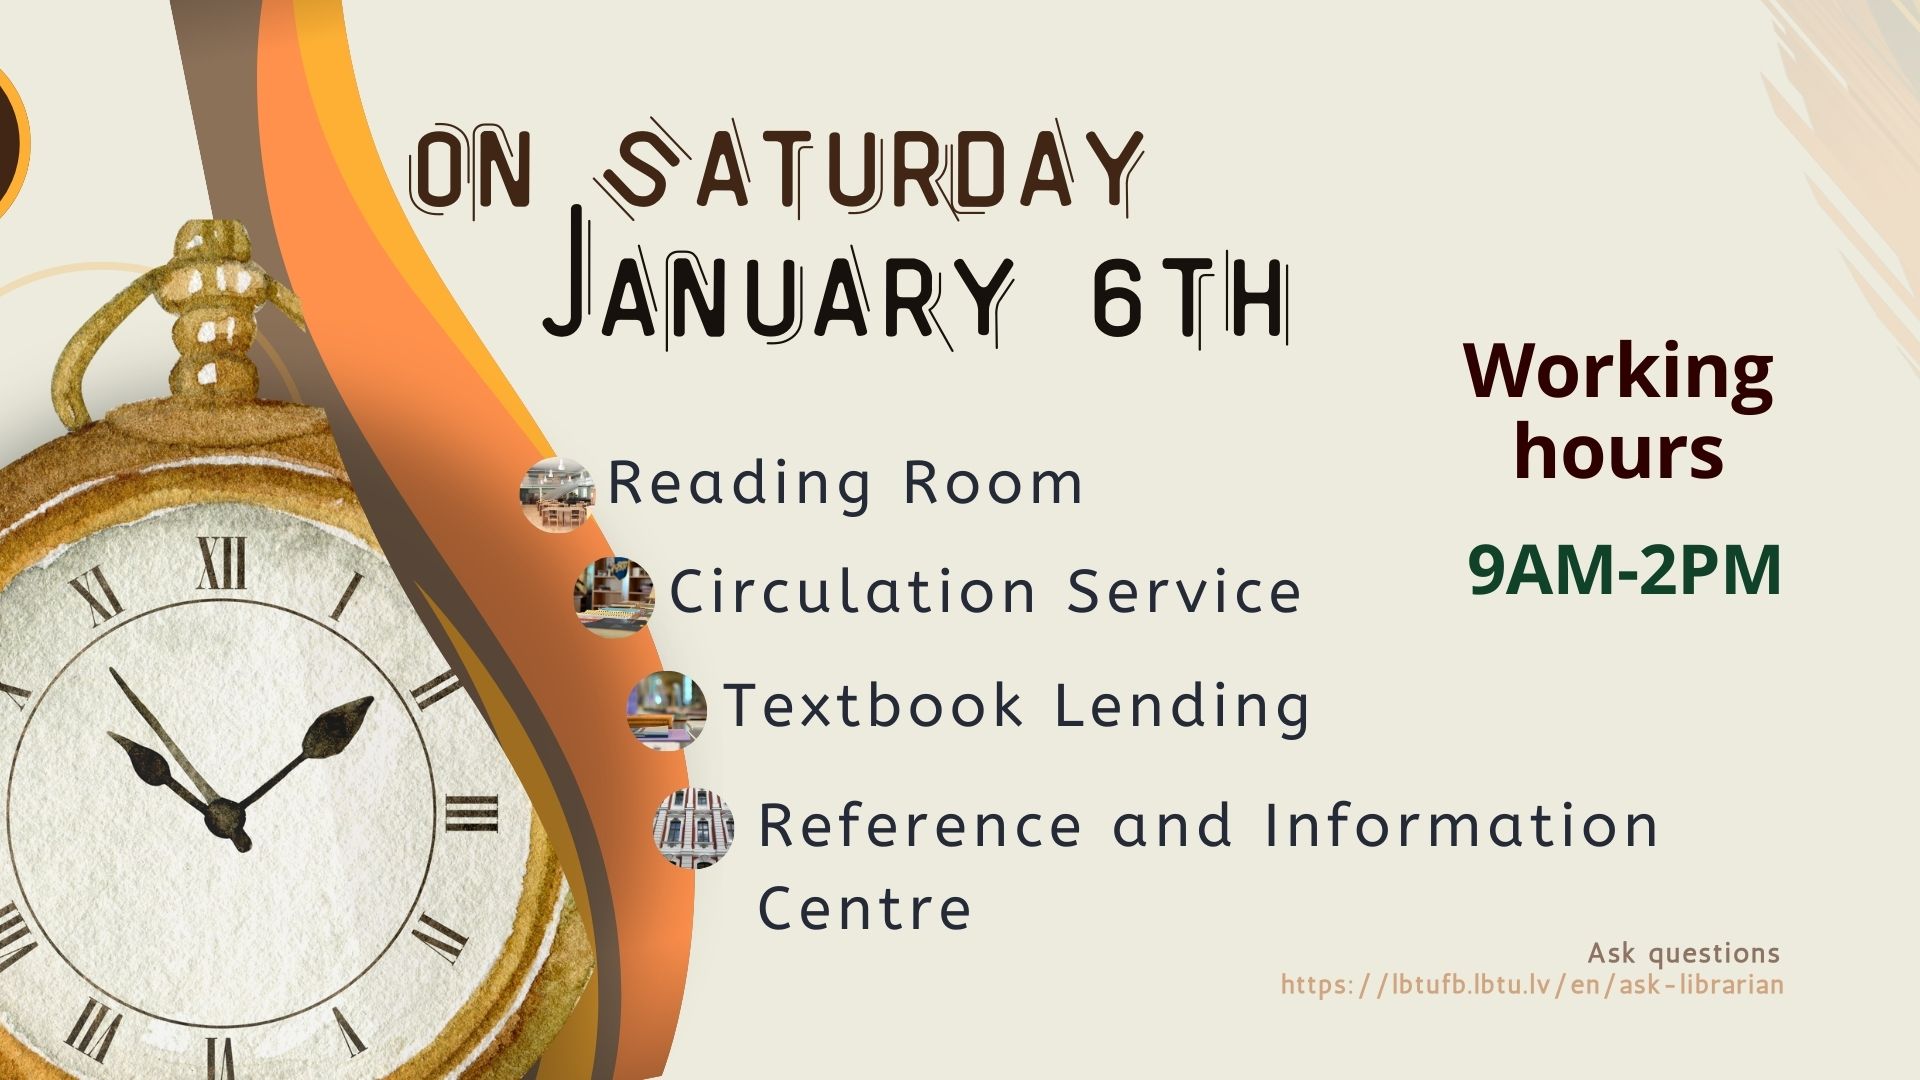 On Saturday, January 6th, library is open from 9am until 2pm